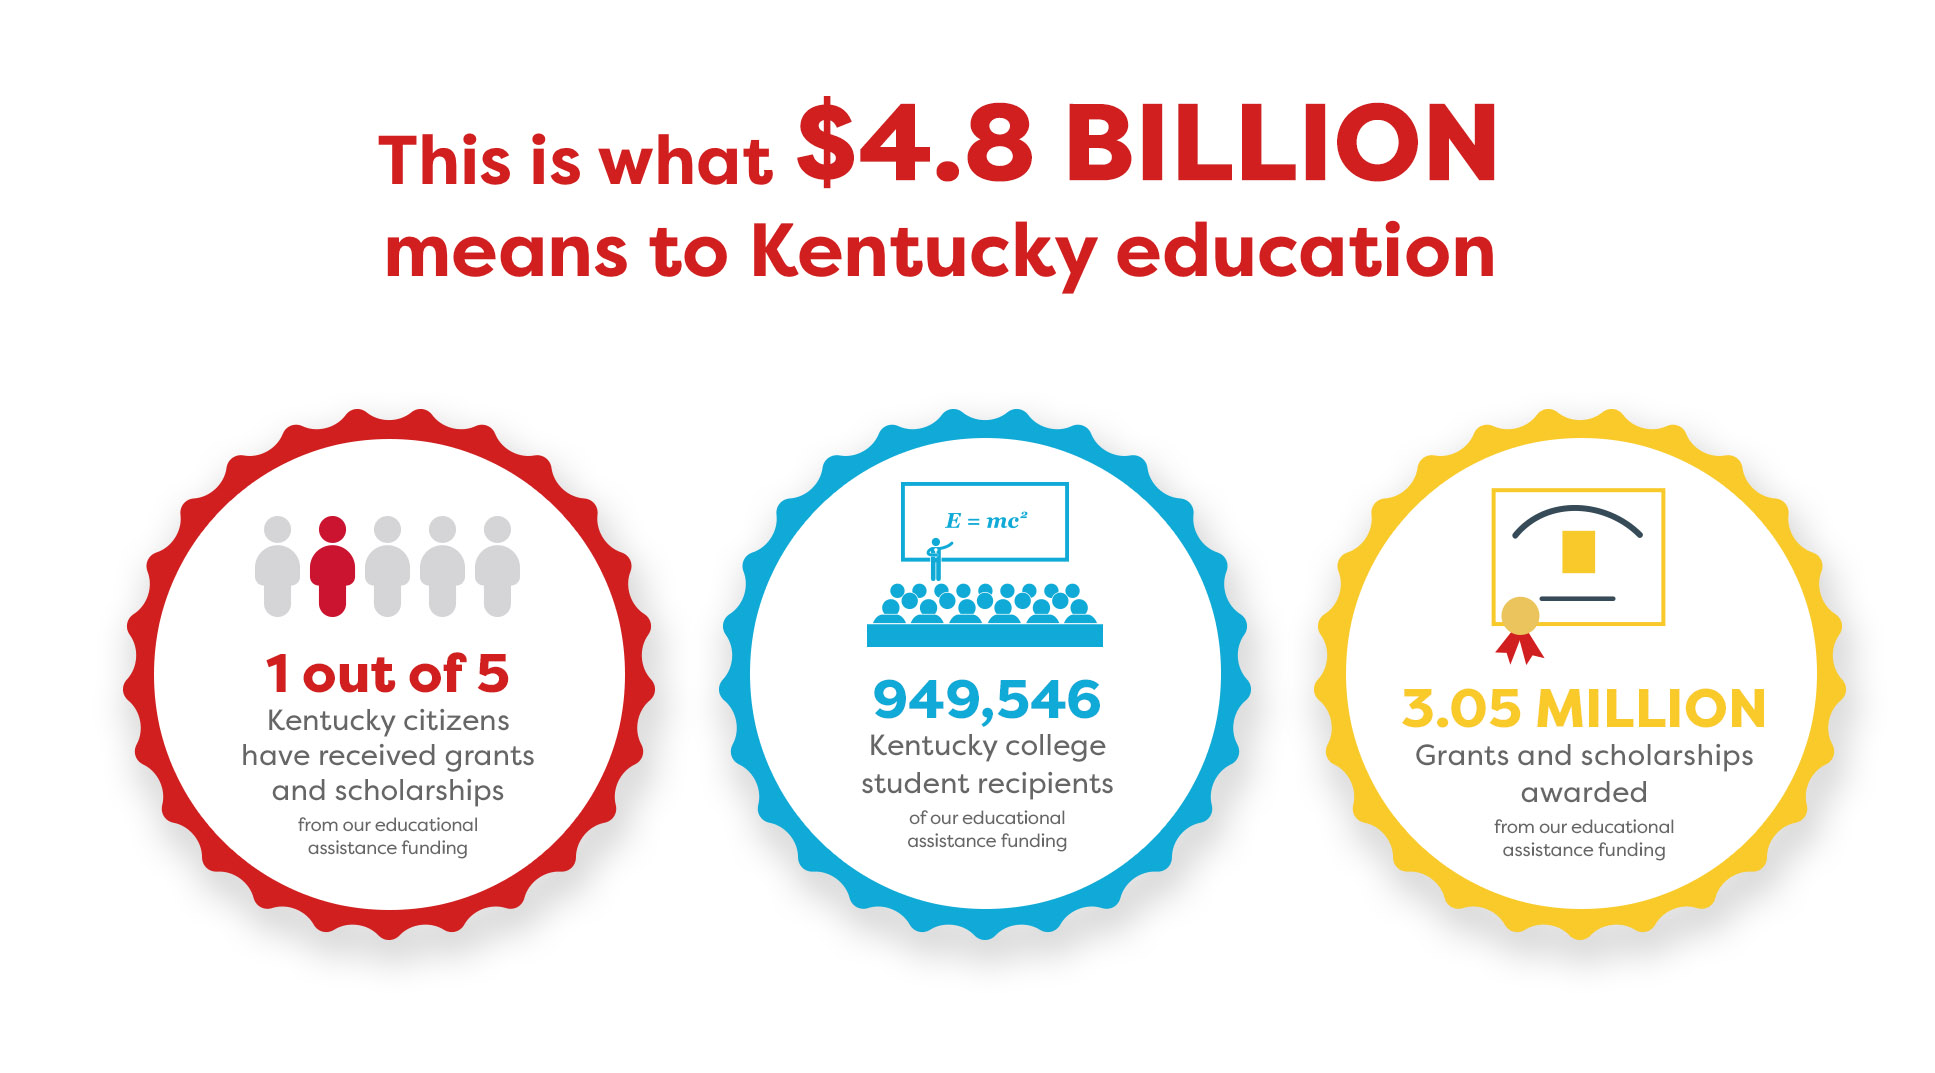 This is what $4.8 Billion means 1 out of 5 KY citizens received grants and scholarships, 949,546 KY college recipients, 3.05 Million grants and scholarships awarded